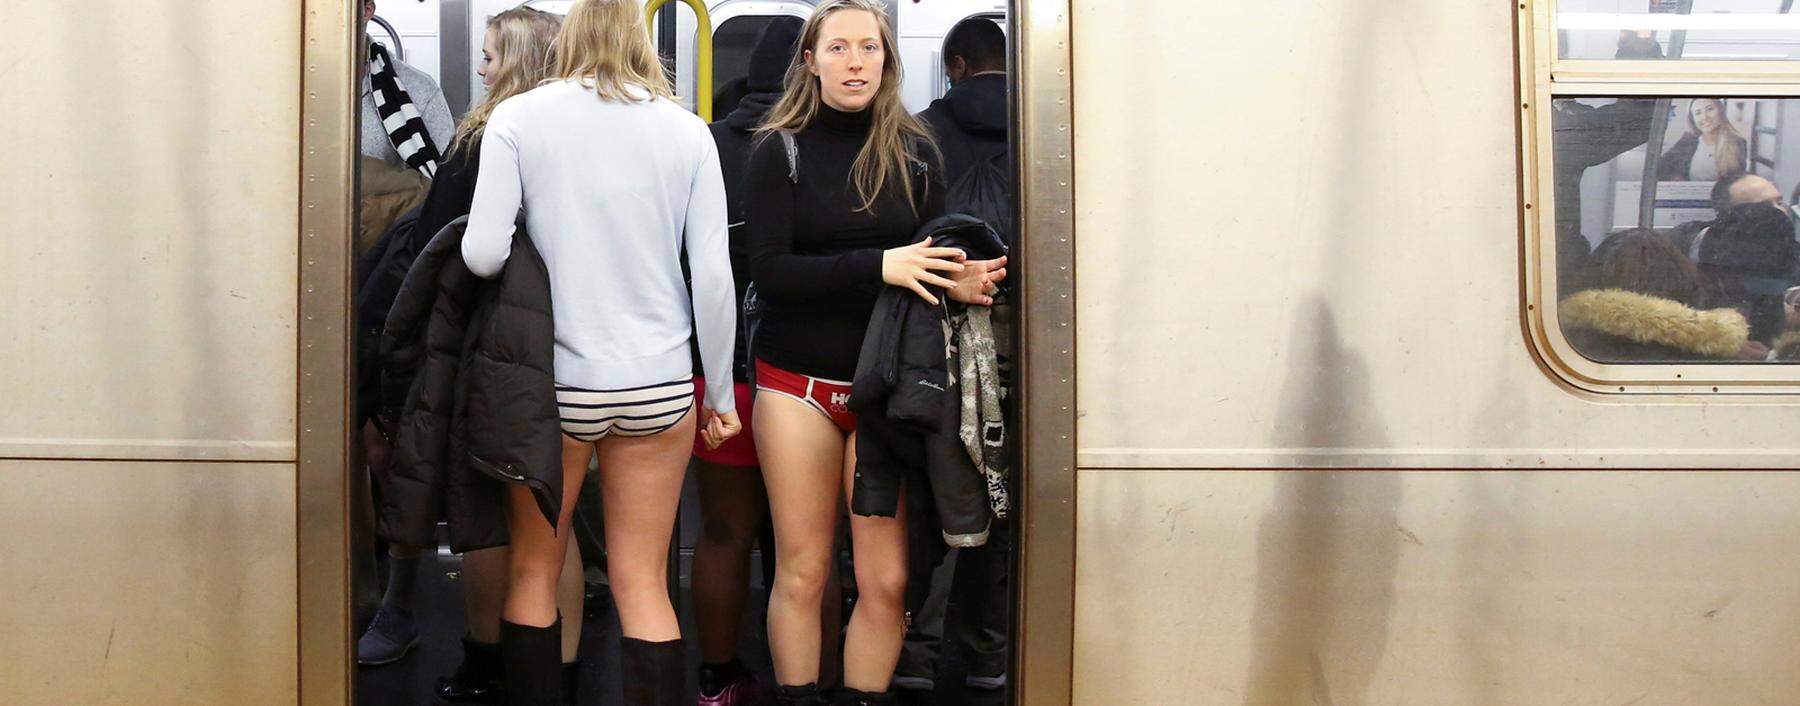 People participate in the annual ´No Pants Subway Ride´ in the Manhattan borough of New York City